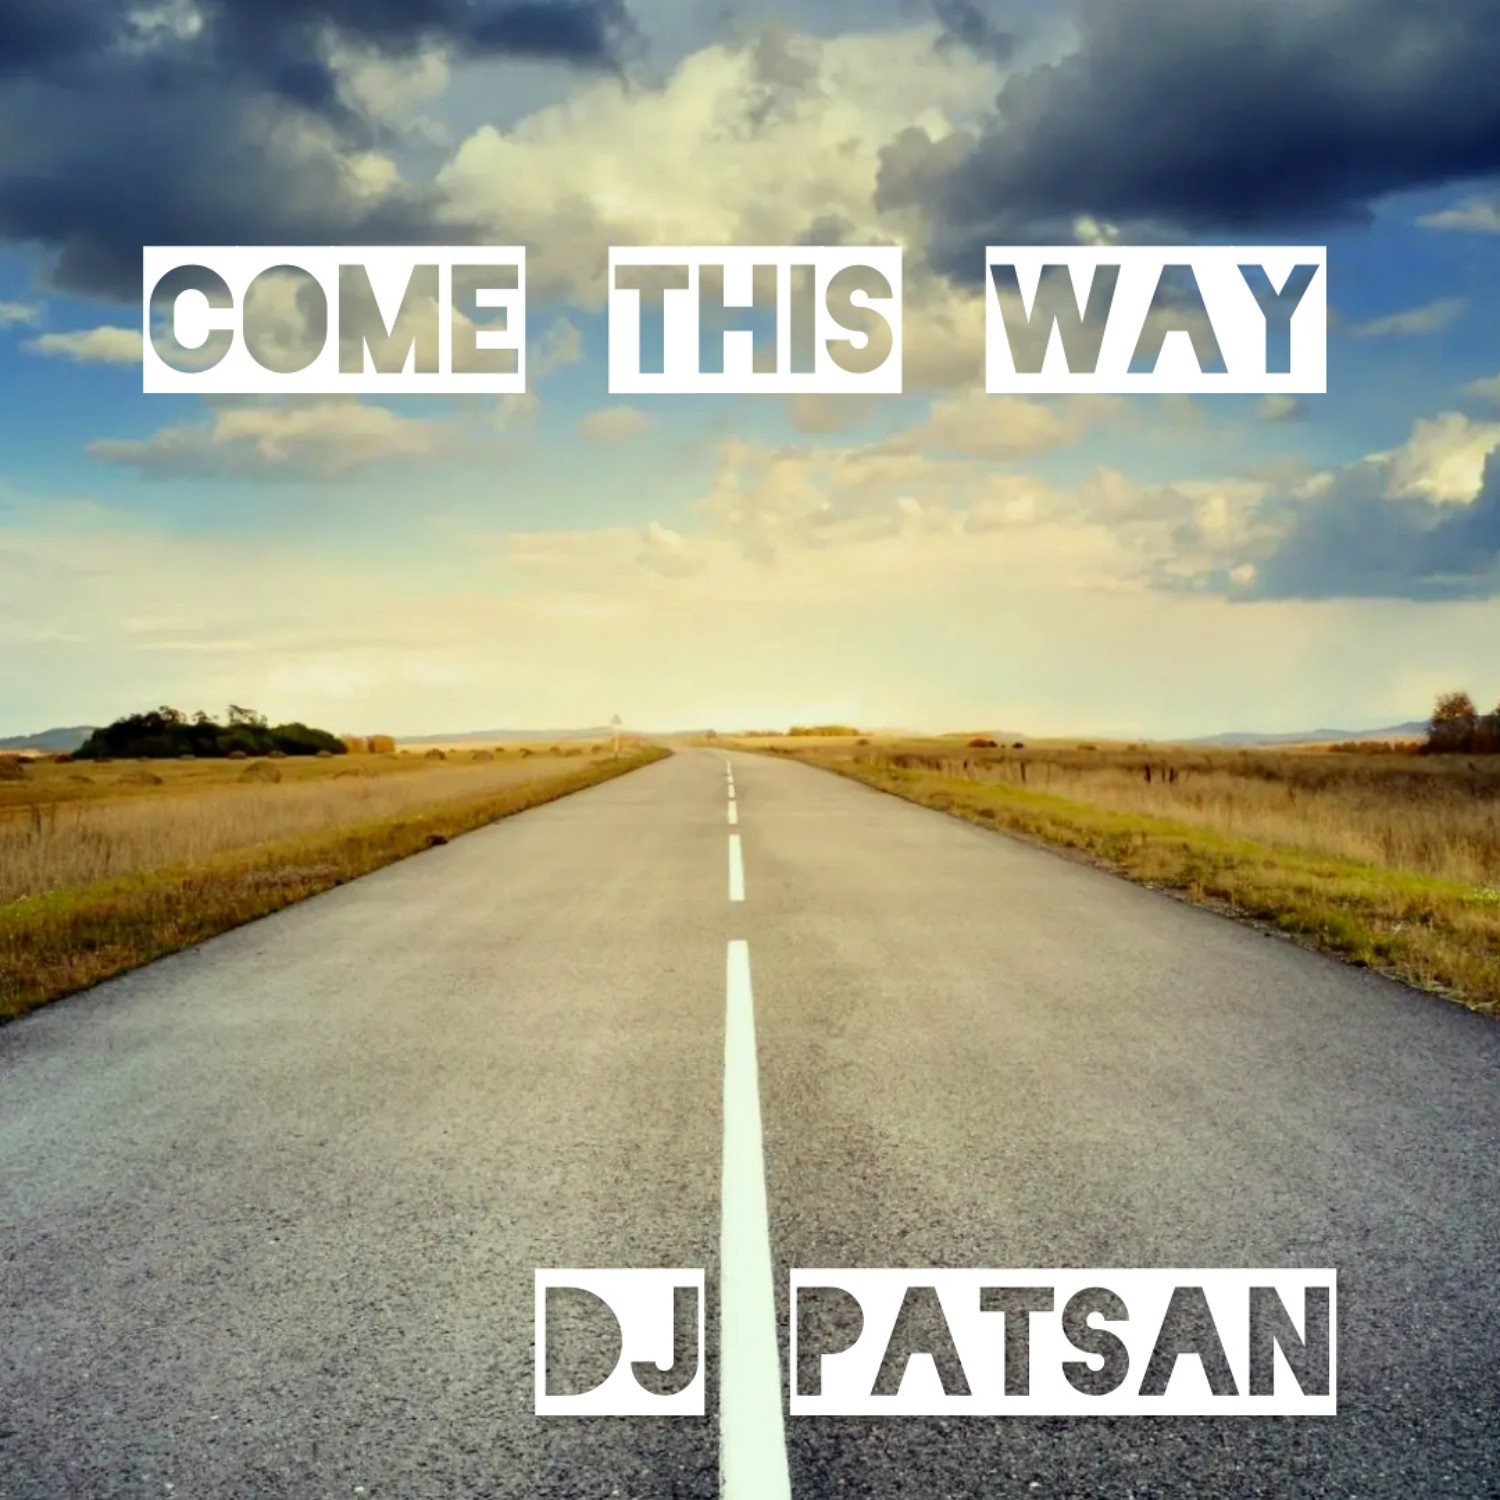 Artwork for the single “Come This Way” by DJ Patsan